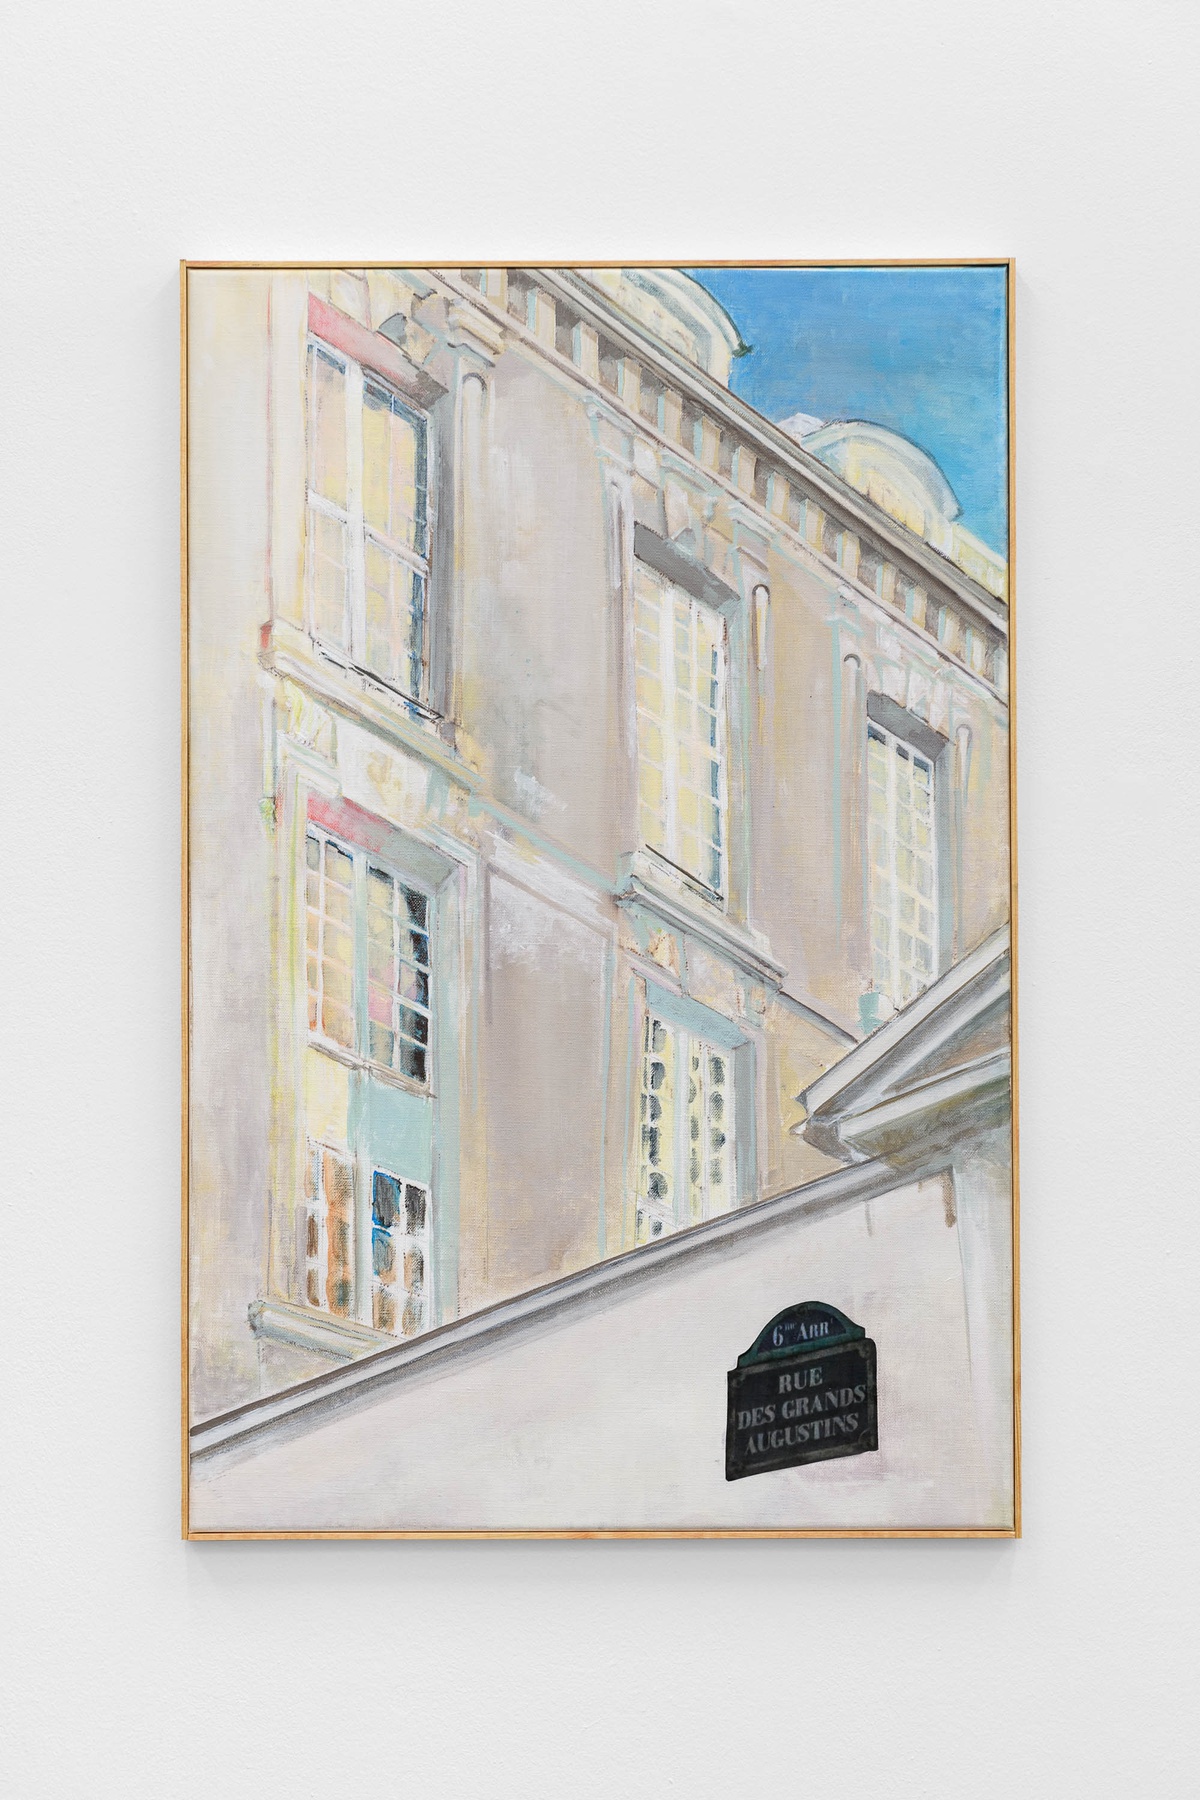 Ariane Mueller, 7 rue de Grand Augustins 2, 2023acrylic and paper on canvas, artist made frame100 x 65 cm